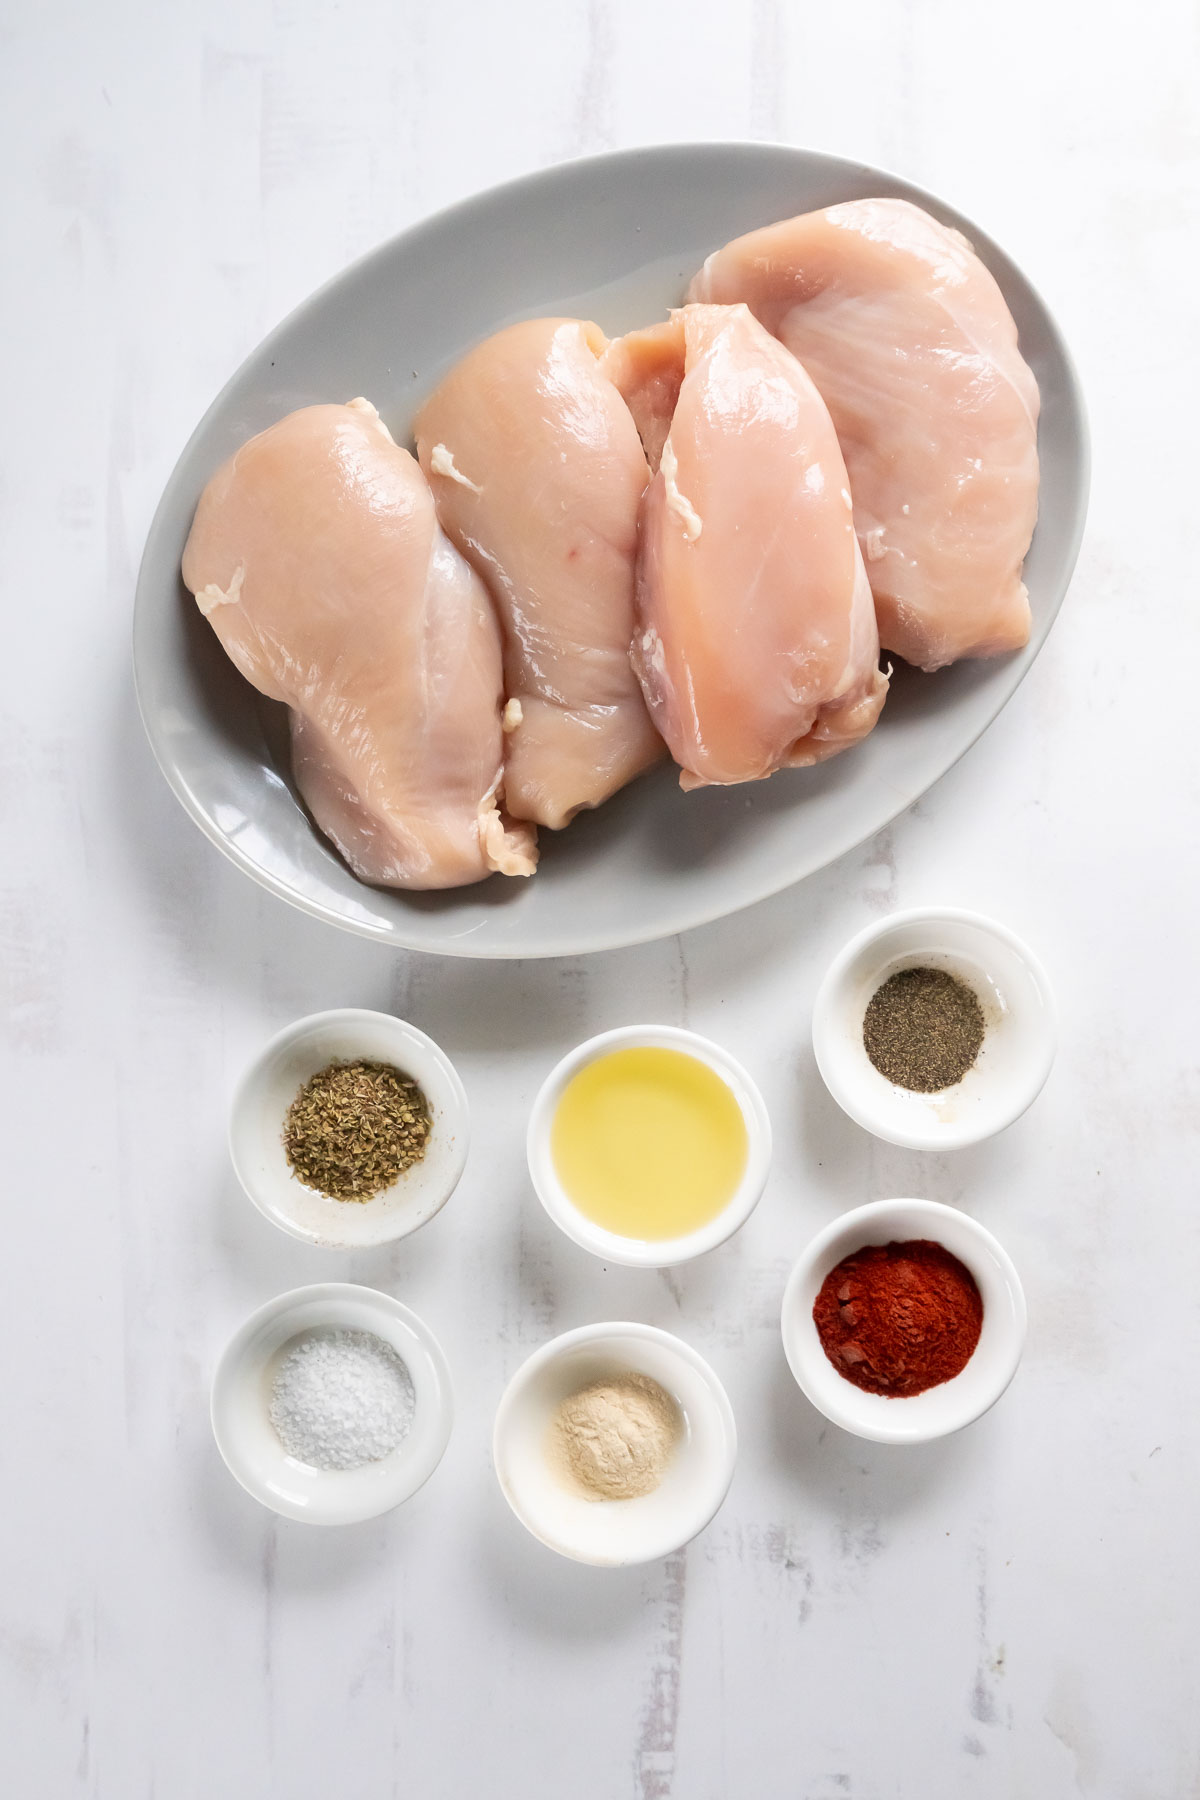 Ingredients for baked chicken breast recipe.